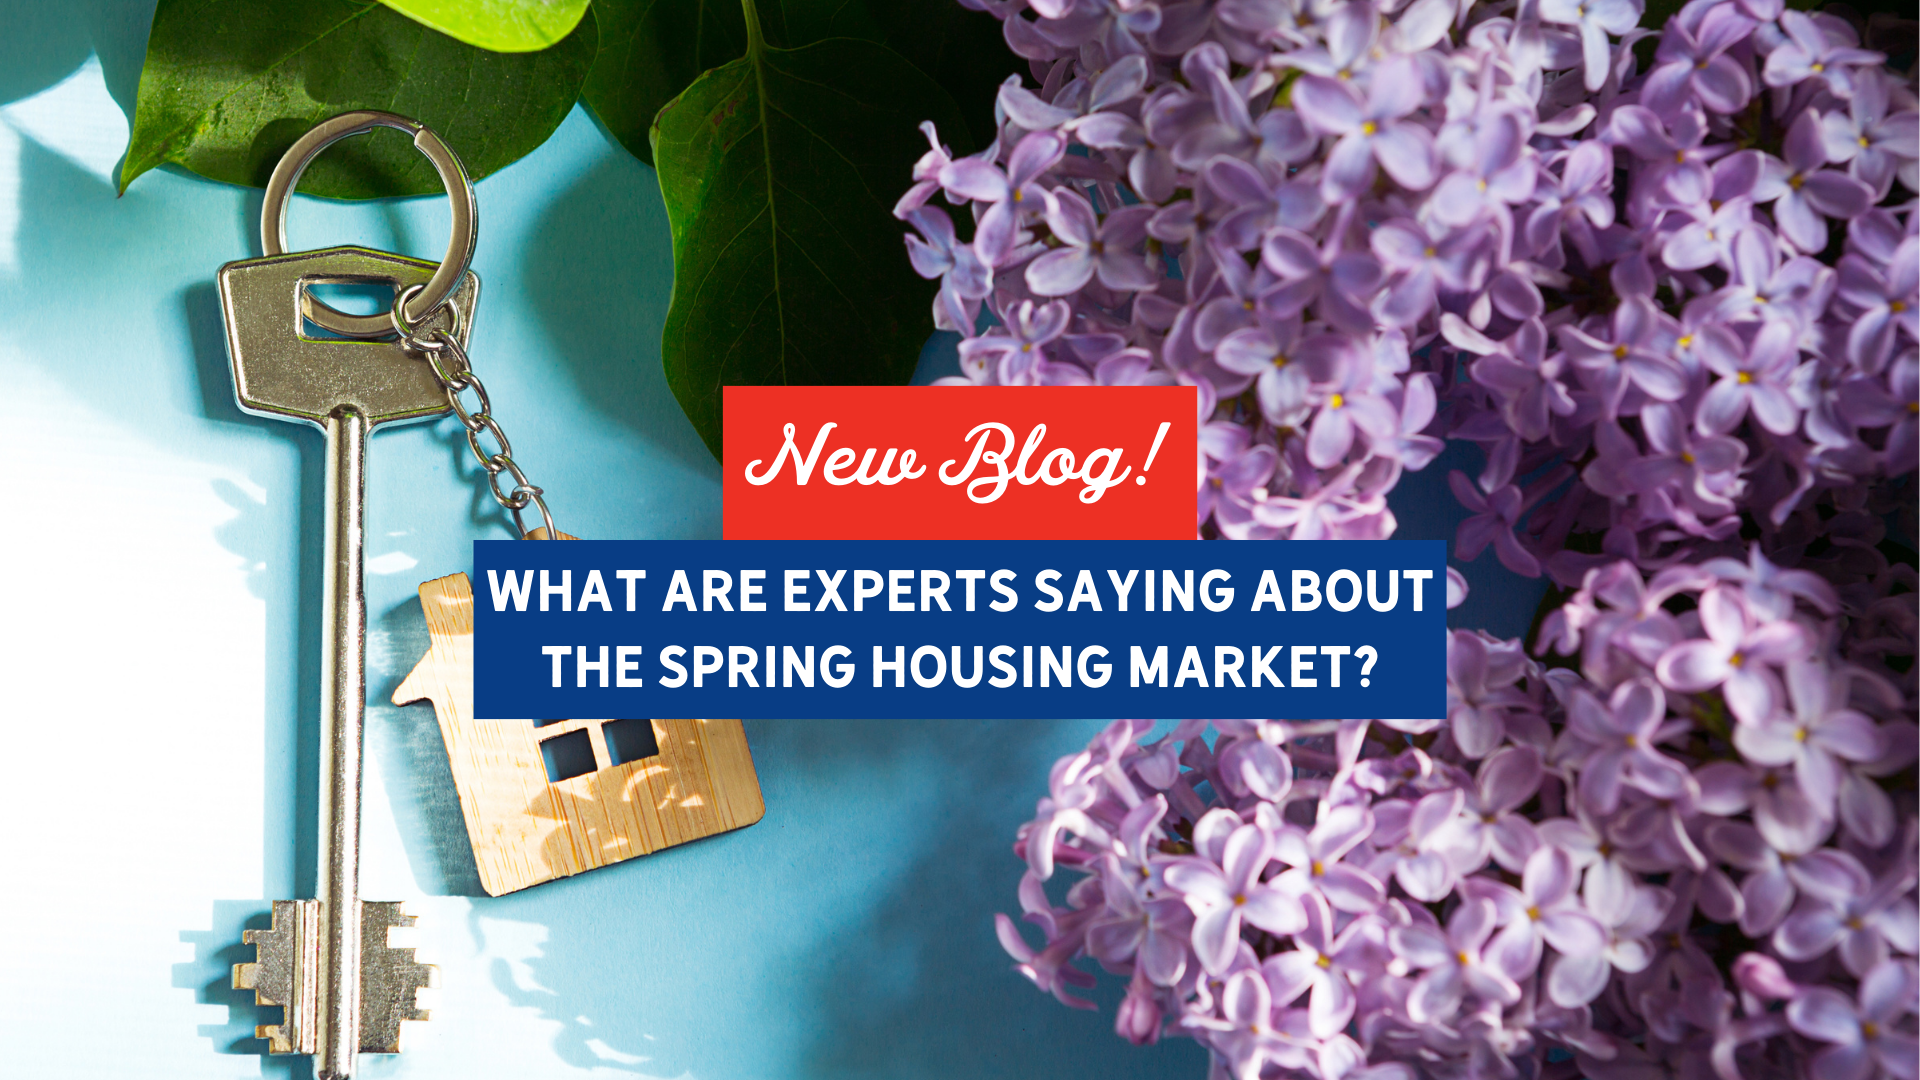 What Are Experts Saying About the Spring Housing Market?